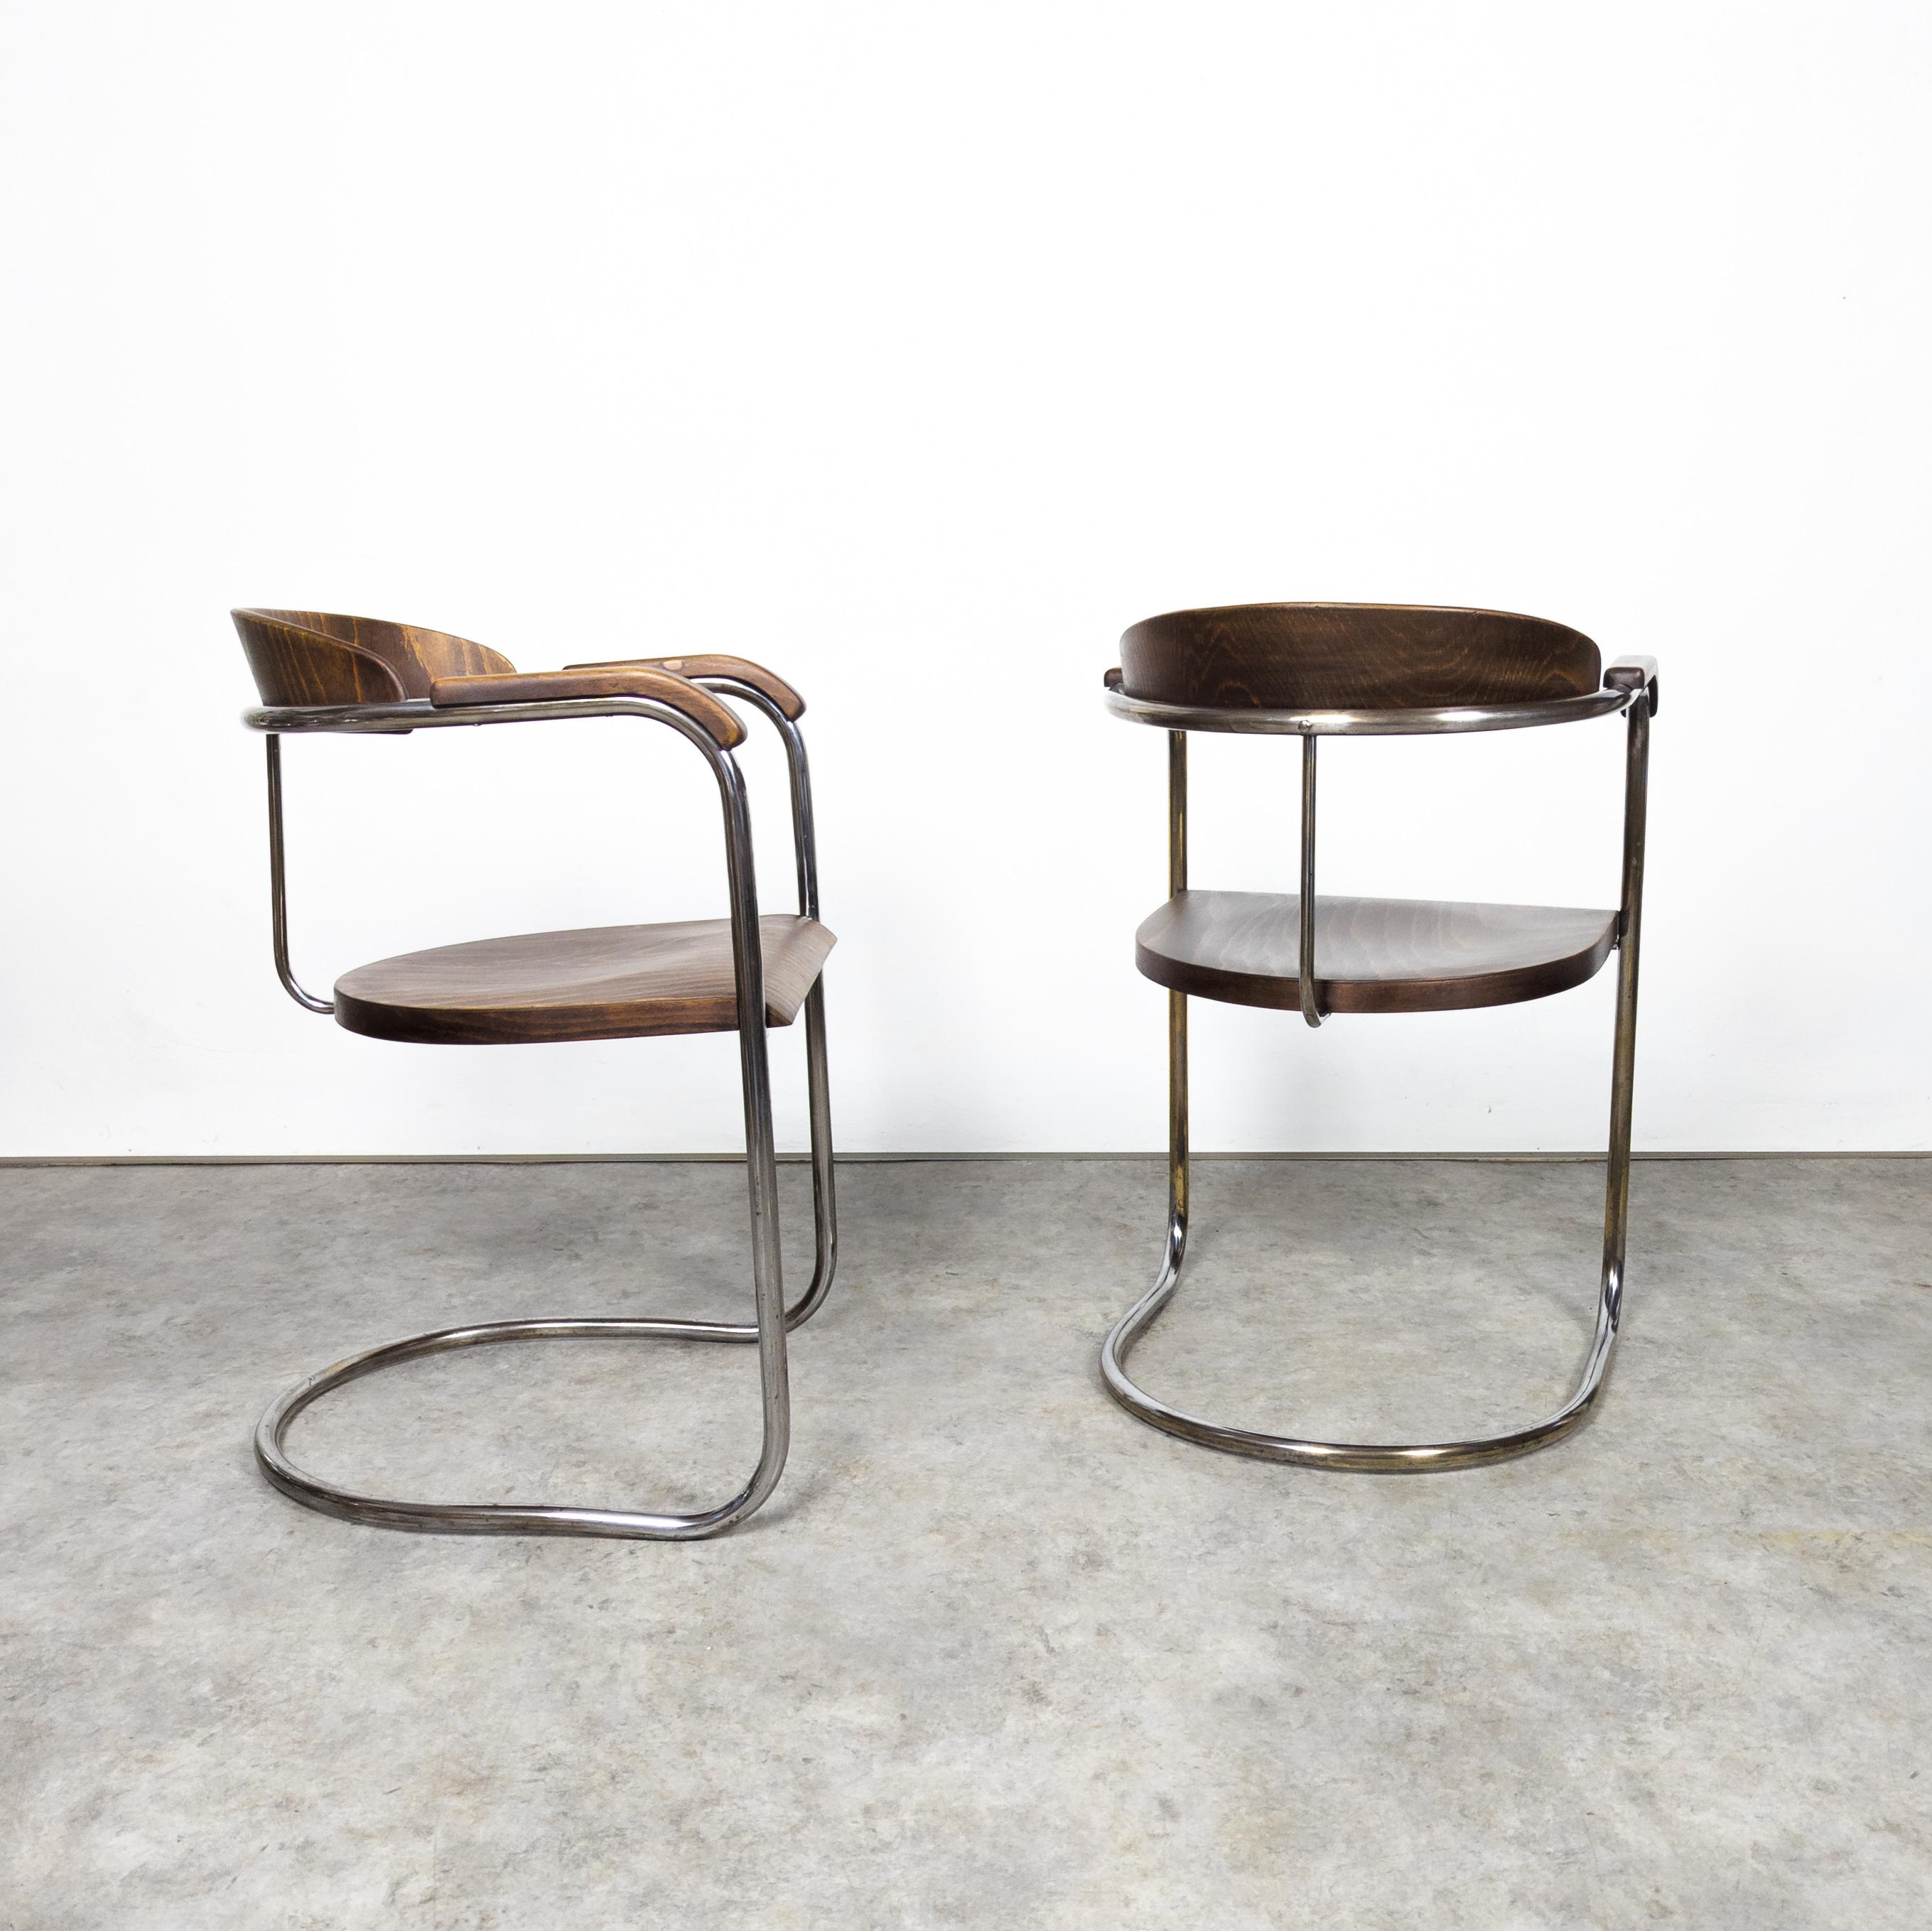 Mid-20th Century Rare Hans and Wassily Luckhardt SS 33 armchairs variant  For Sale